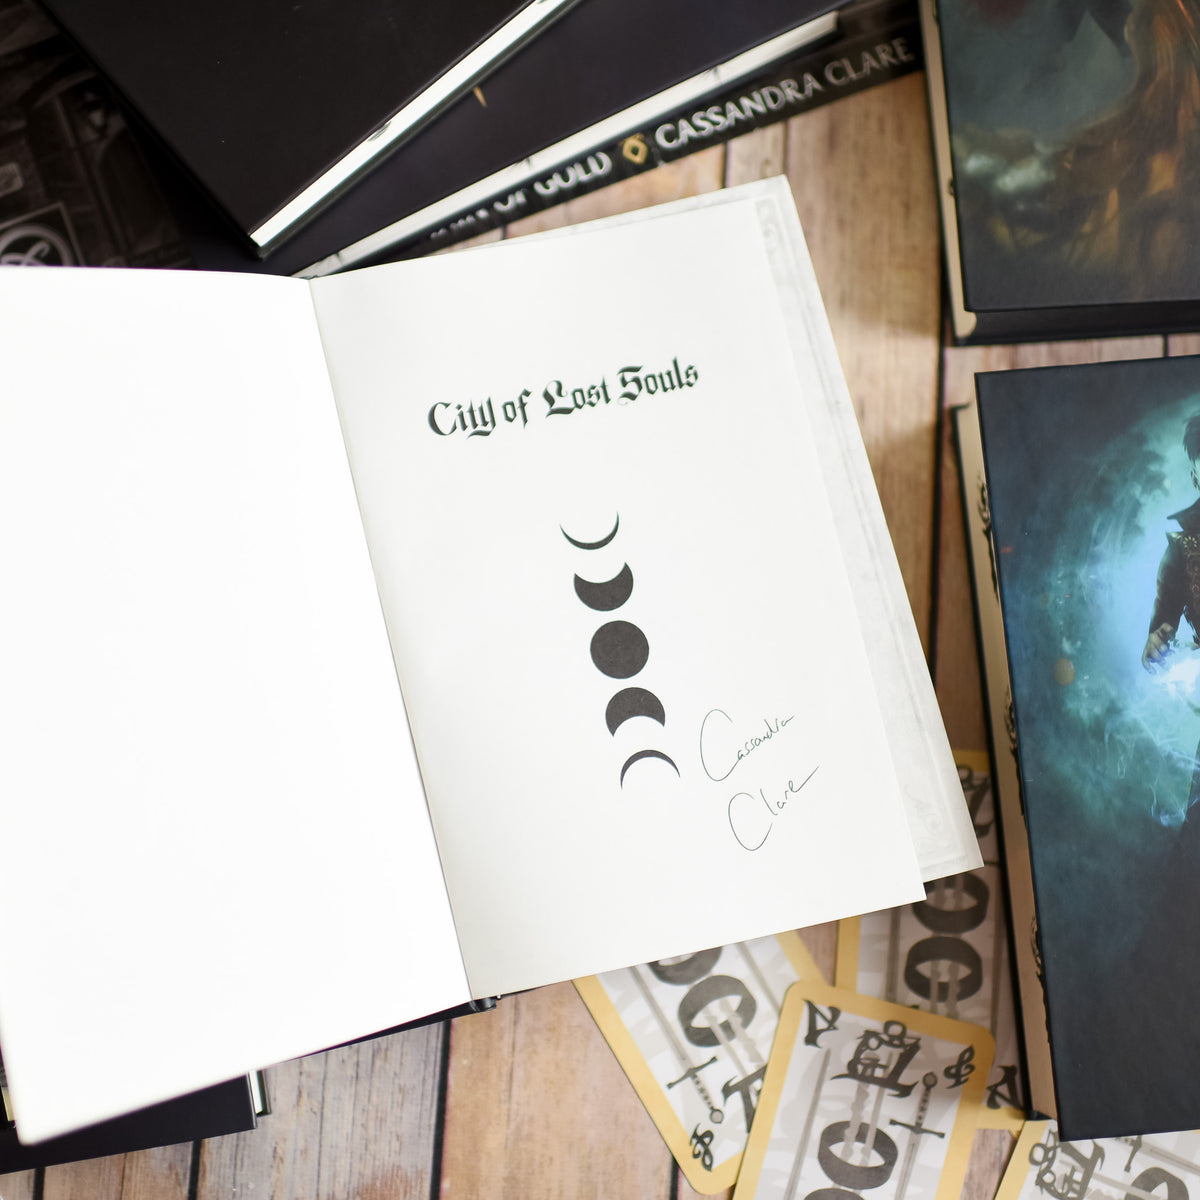 Special Edition The Mortal Instruments Box Set | Collectibles &amp; Gifts for Booklovers